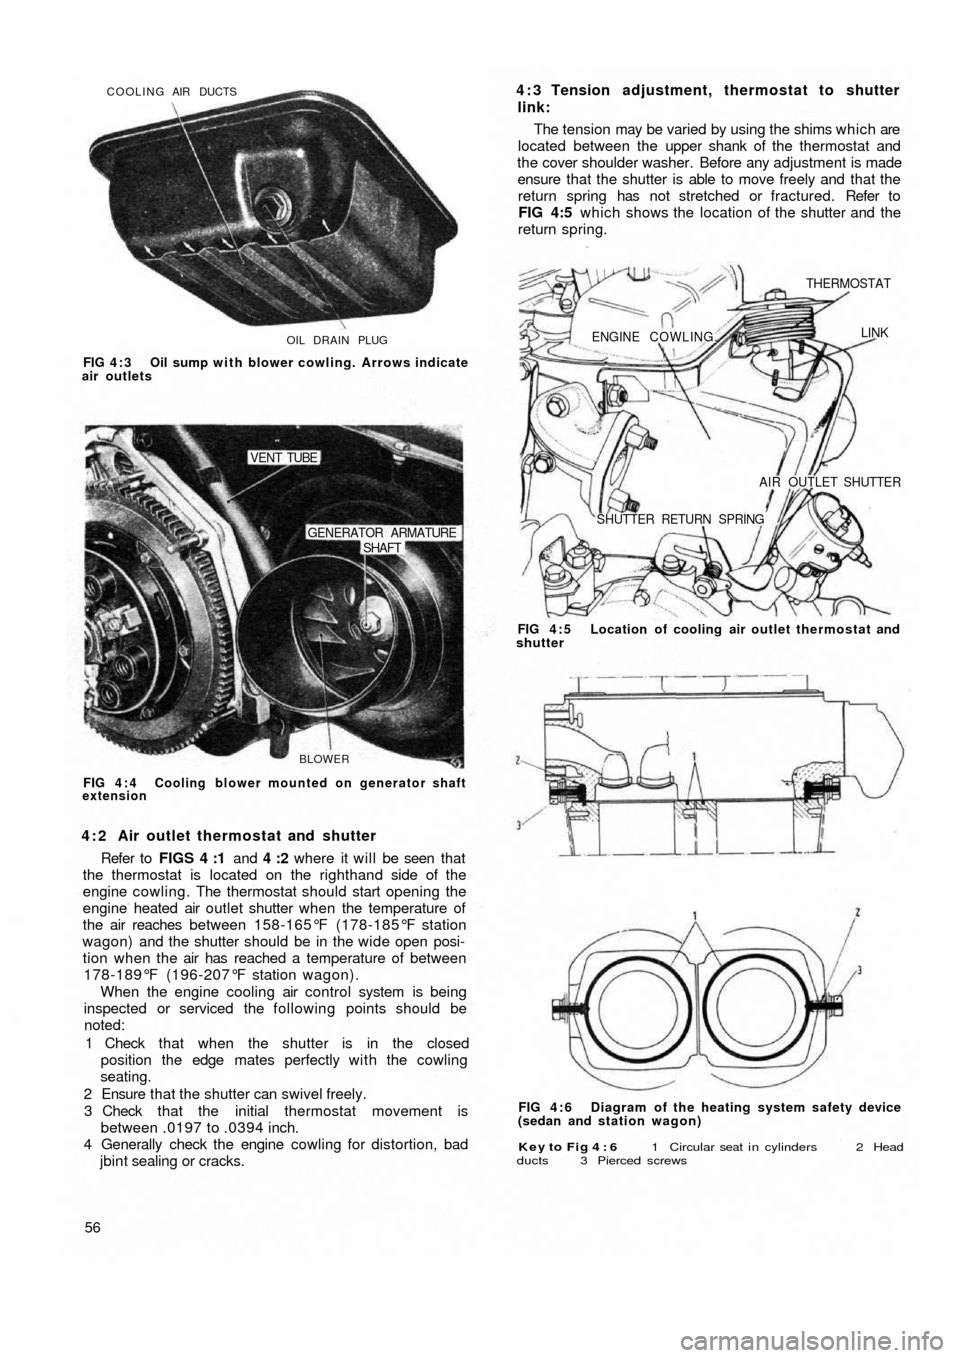 FIAT 500 1970 1.G Service Manual OIL DRAIN PLUG COOLING AIR DUCTS
FIG 4 : 3  Oil sump with blower cowling. Arrows indicate
air outlets
BLOWER
SHAFT GENERATOR ARMATURE
VENT TUBE
FIG 4 : 4  Cooling blower mounted on generator shaft
ext